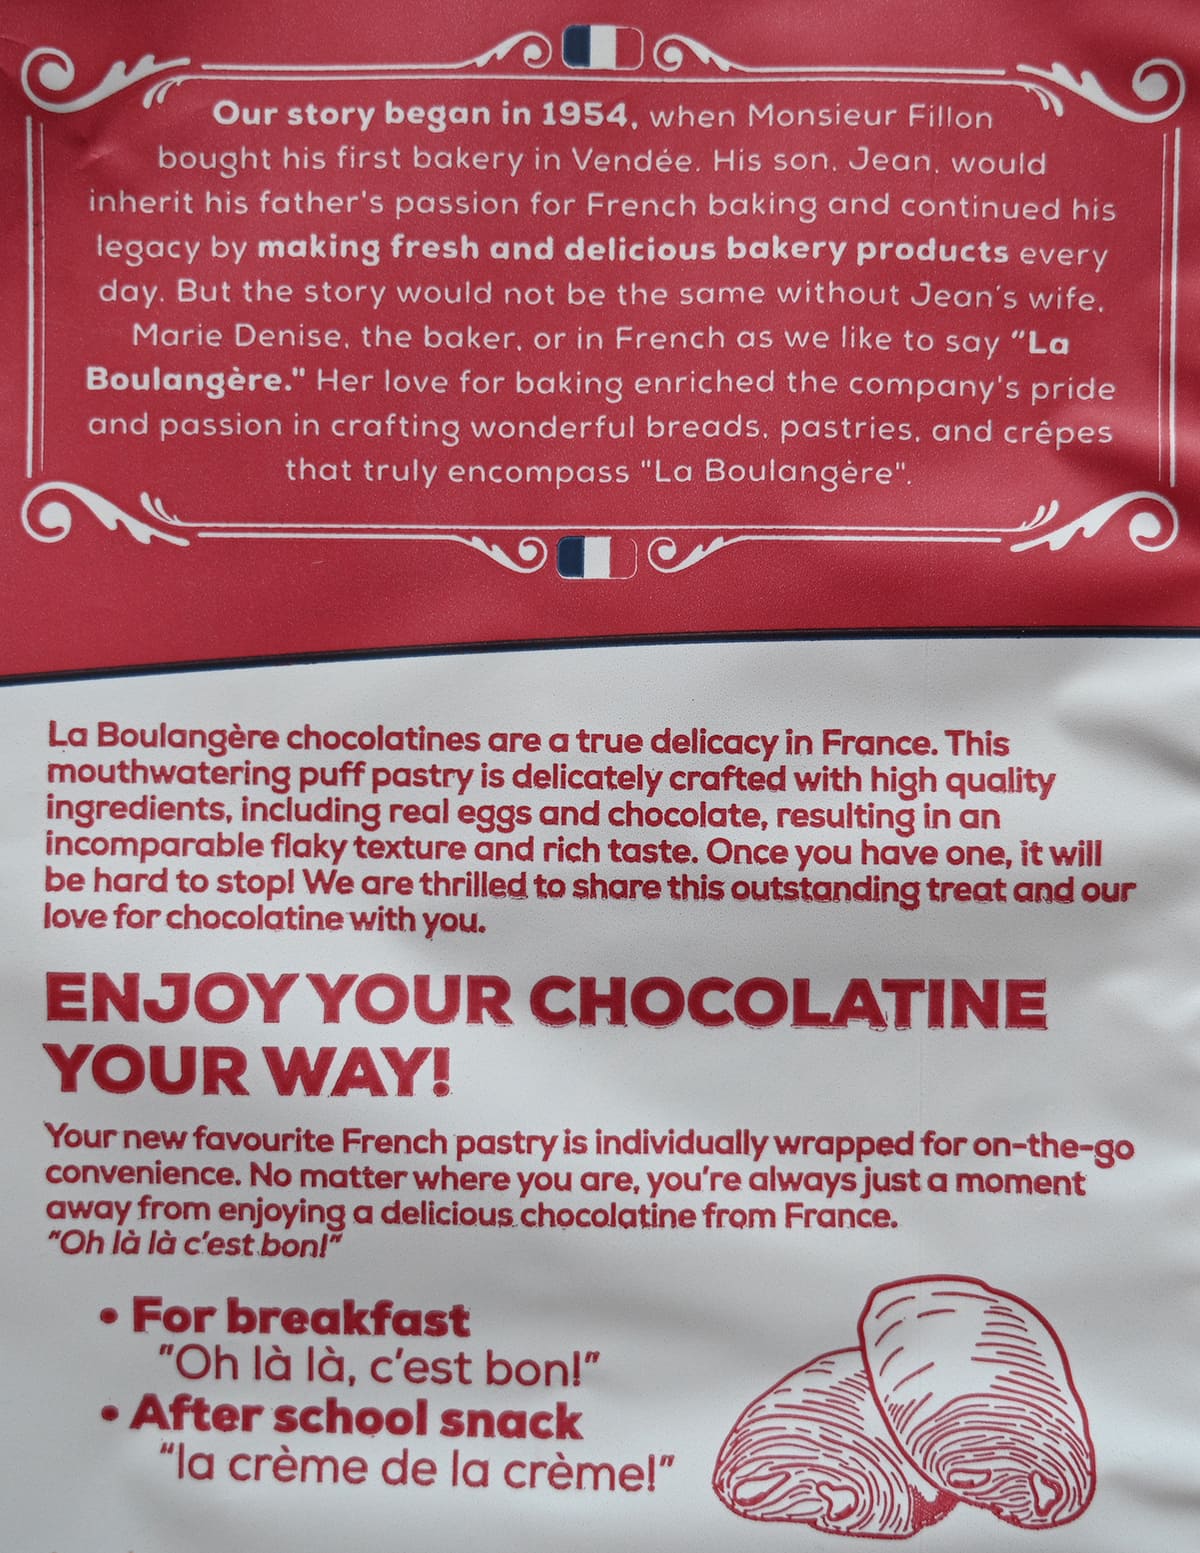 Image of the product and company description for the chocolatine from the back of the bag.